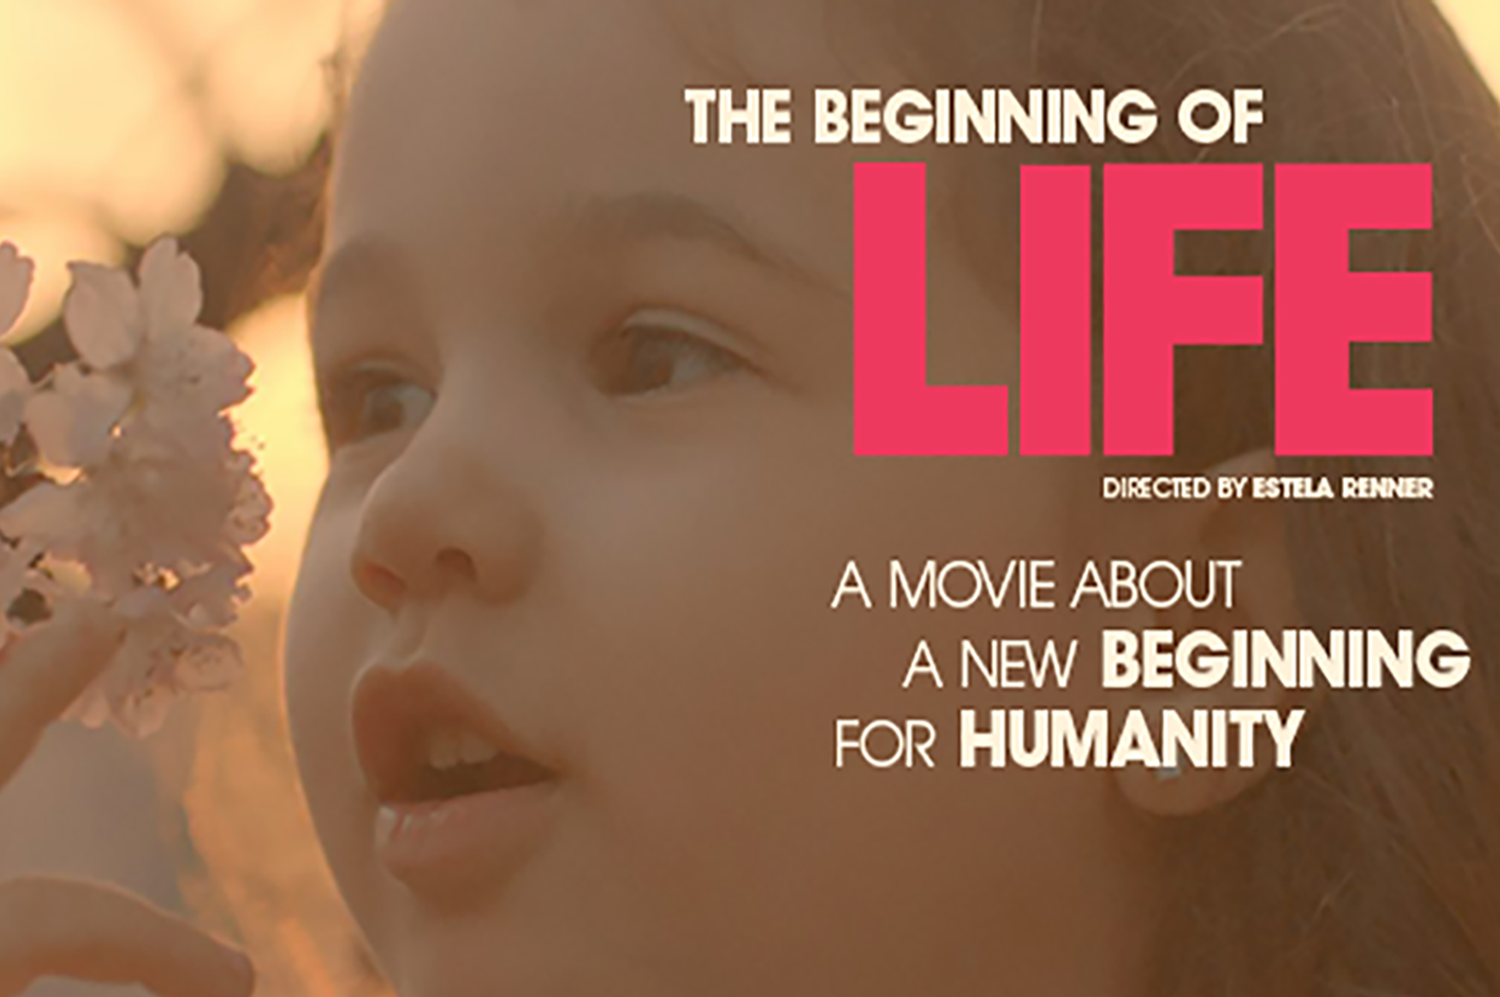 "The Beginning of Life" documentary banner of young girl gazing at apple blossom.